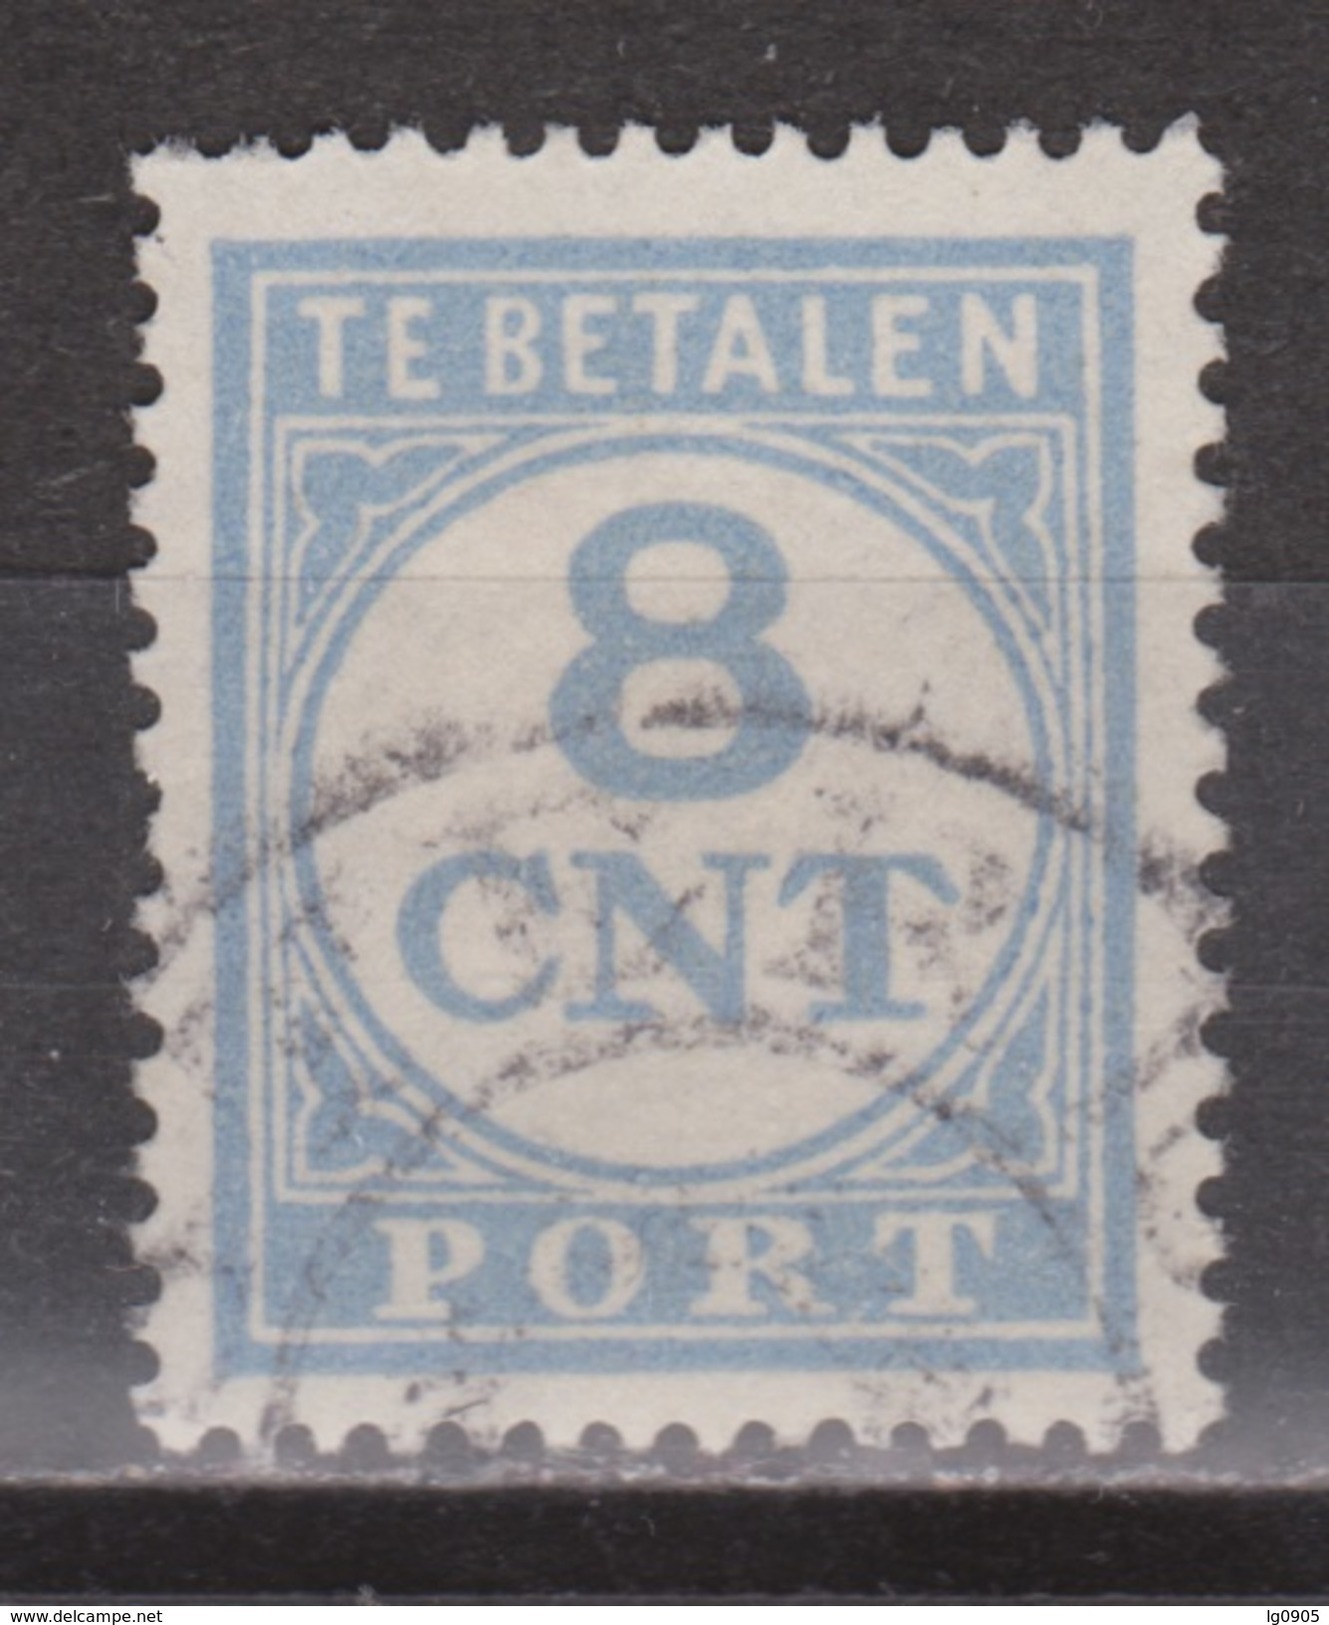 NVPH Nederland Netherlands Holanda Pays Bas Port 73 Used Timbre-taxe Postmarke Sellos De Correos NOW MANY DUE STAMPS - Strafportzegels